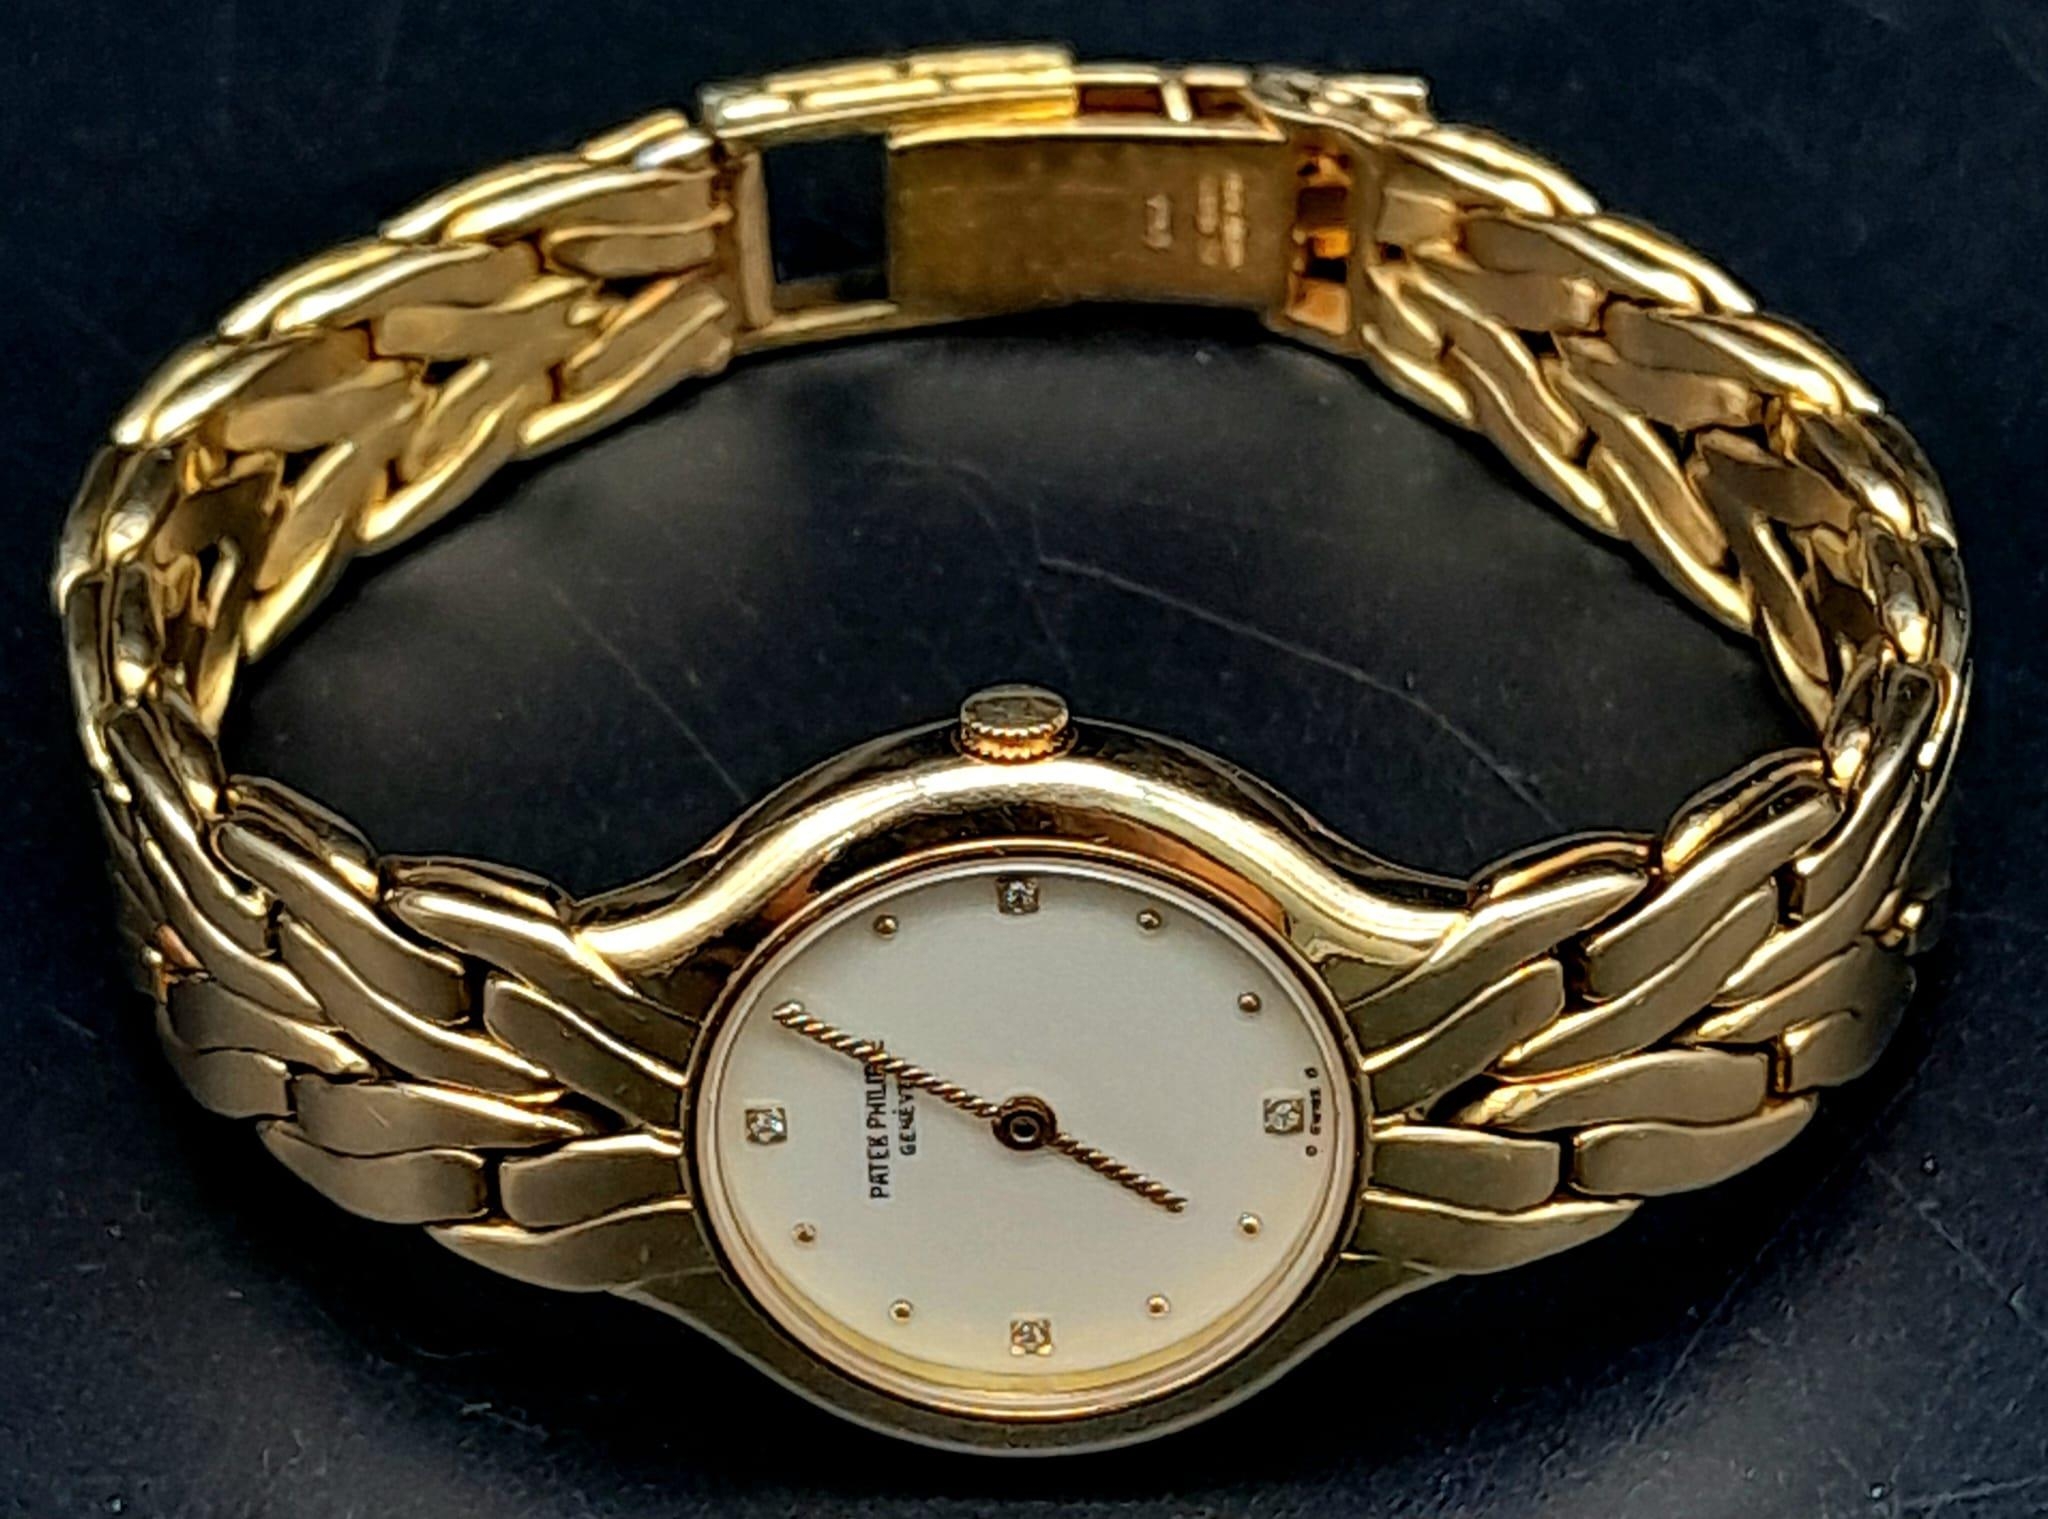 A Glorious 18K Yellow Gold Patek Philippe 'La Flamme' Ladies Watch. 18k gold bracelet and case - - Image 5 of 10